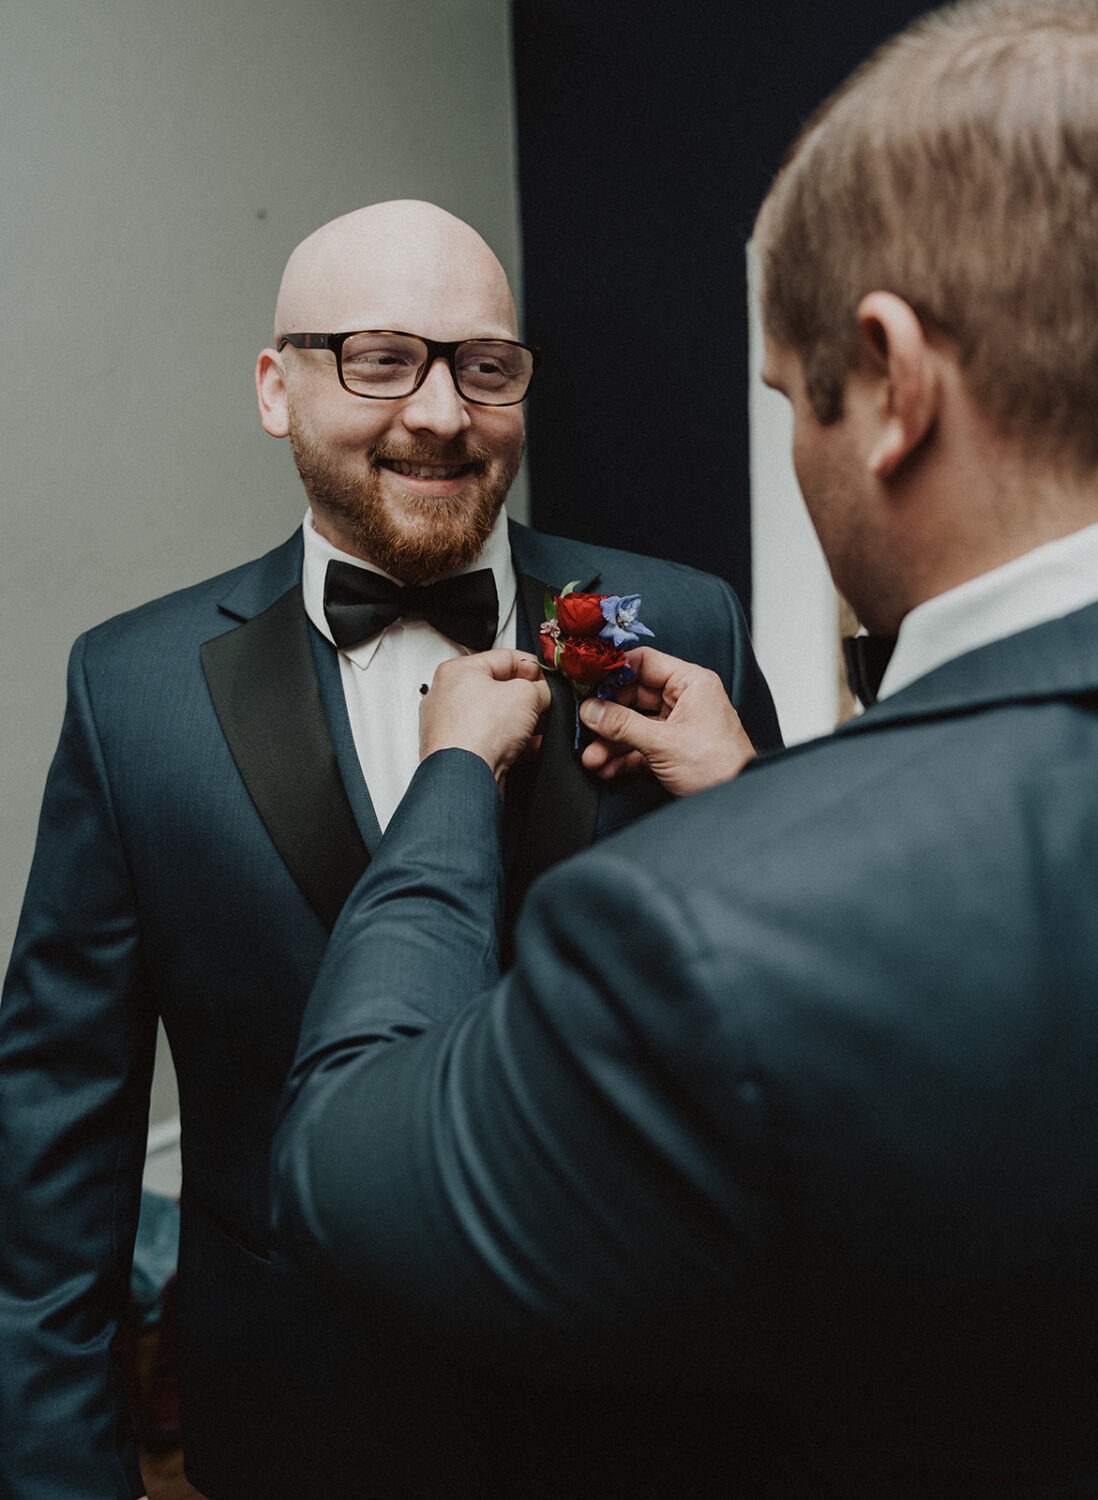 groom gets help with boutonniere using wedding planning tips